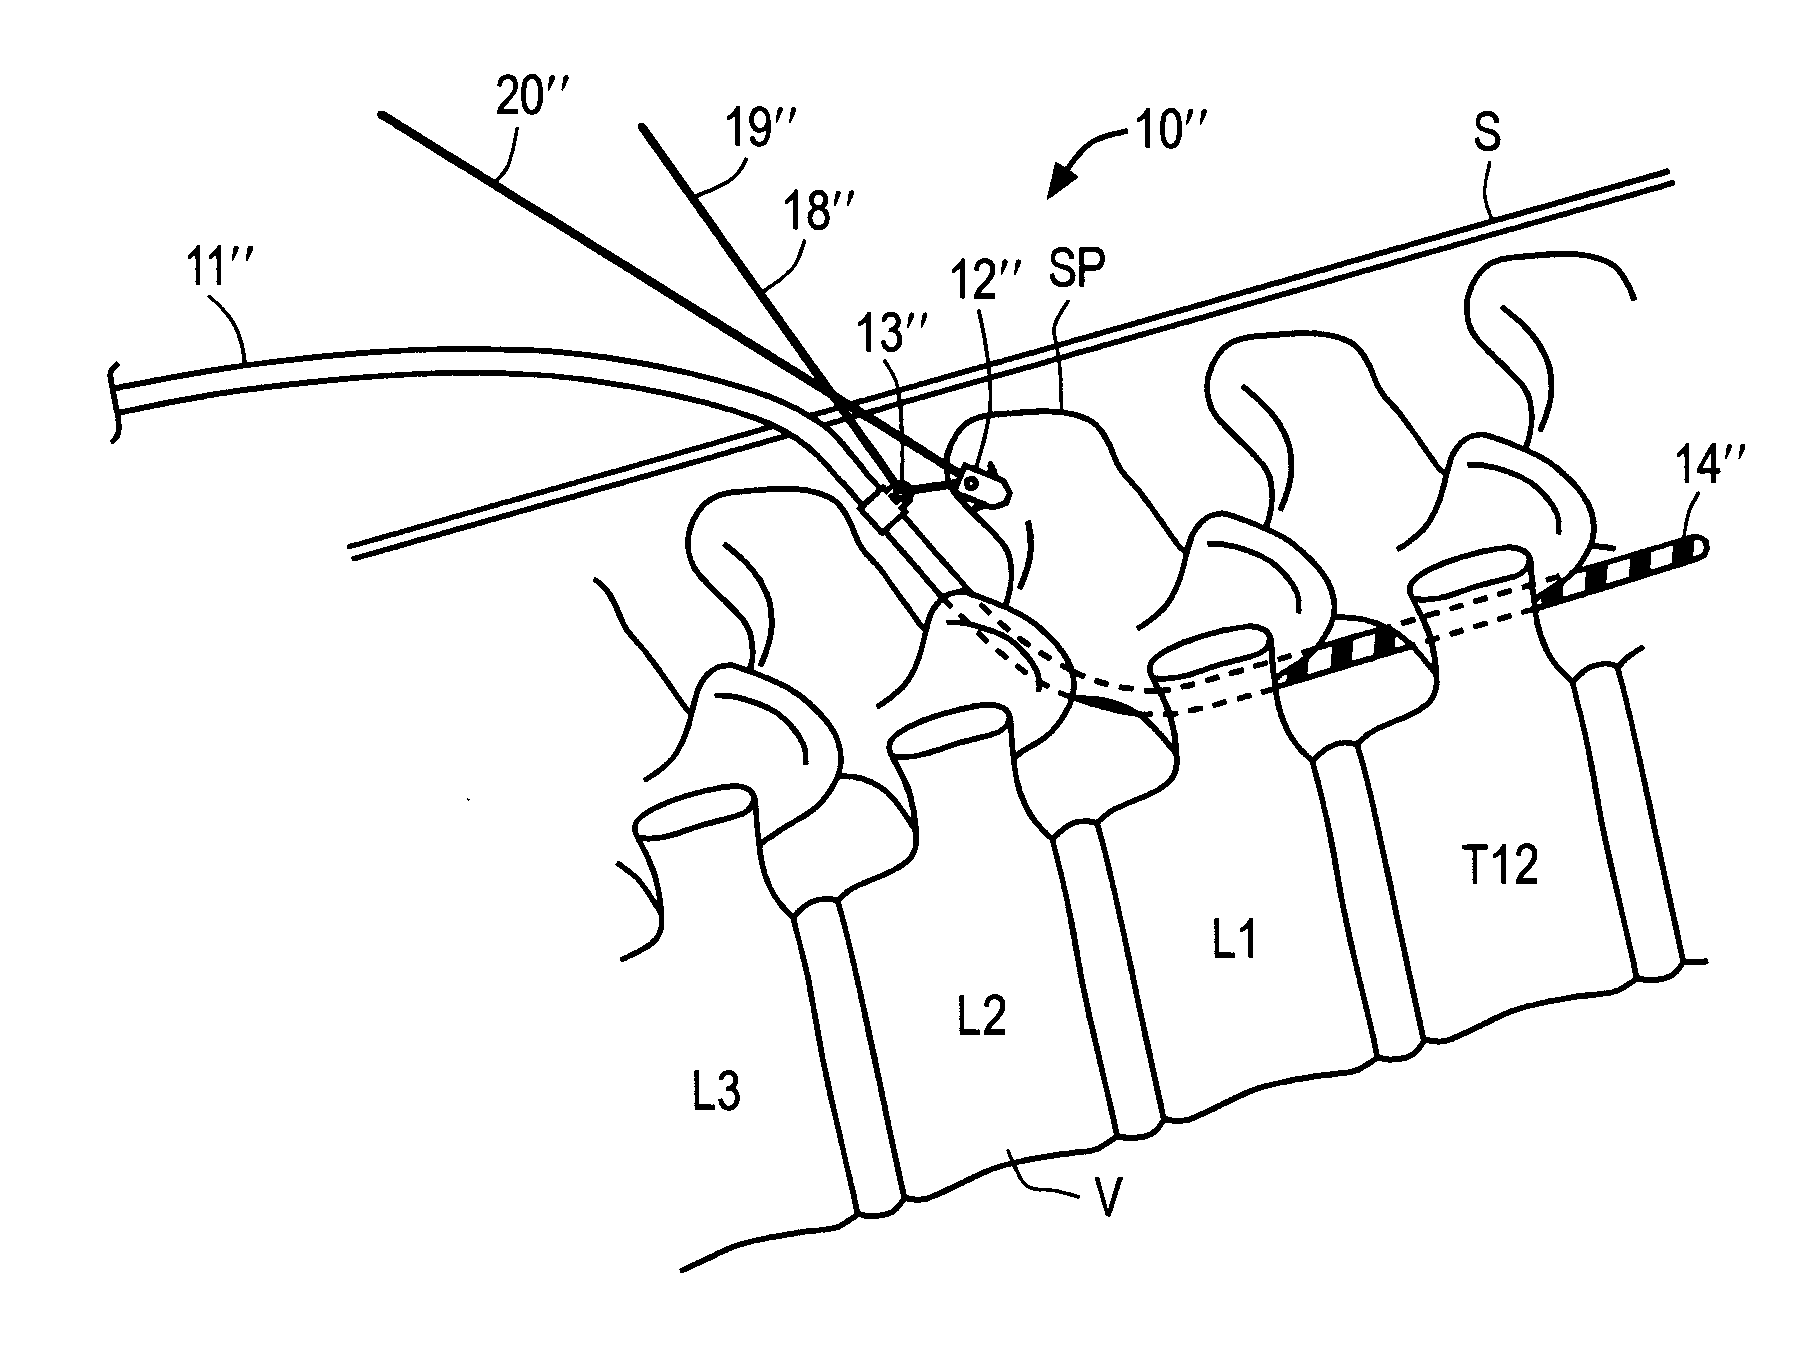 Apparatus and methods for anchoring electrode leads for use with implantable neuromuscular electrical stimulator